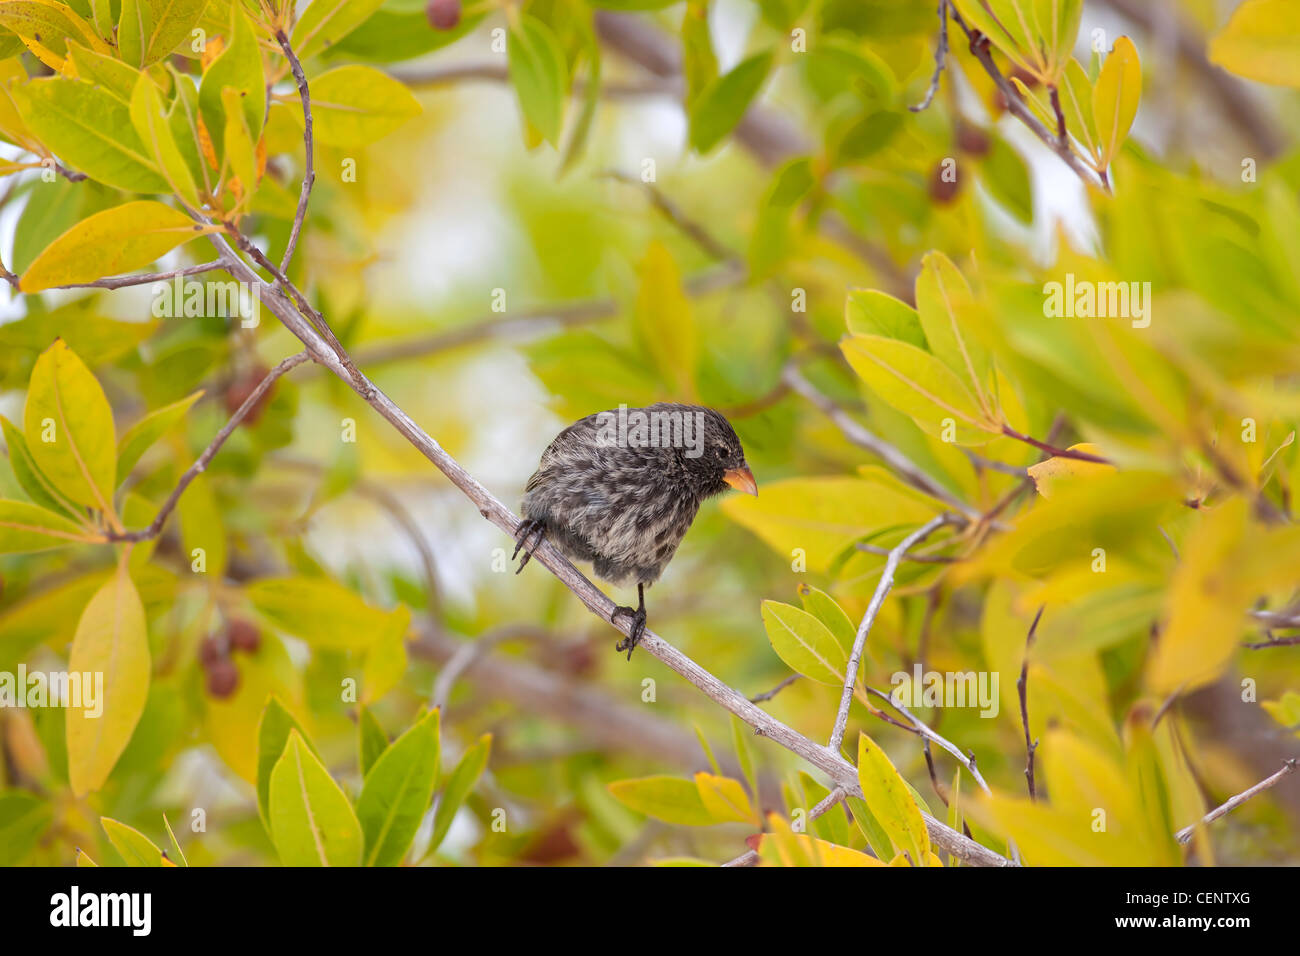 A Galapagos finch in mangrove trees on Tortuga bay Stock Photo